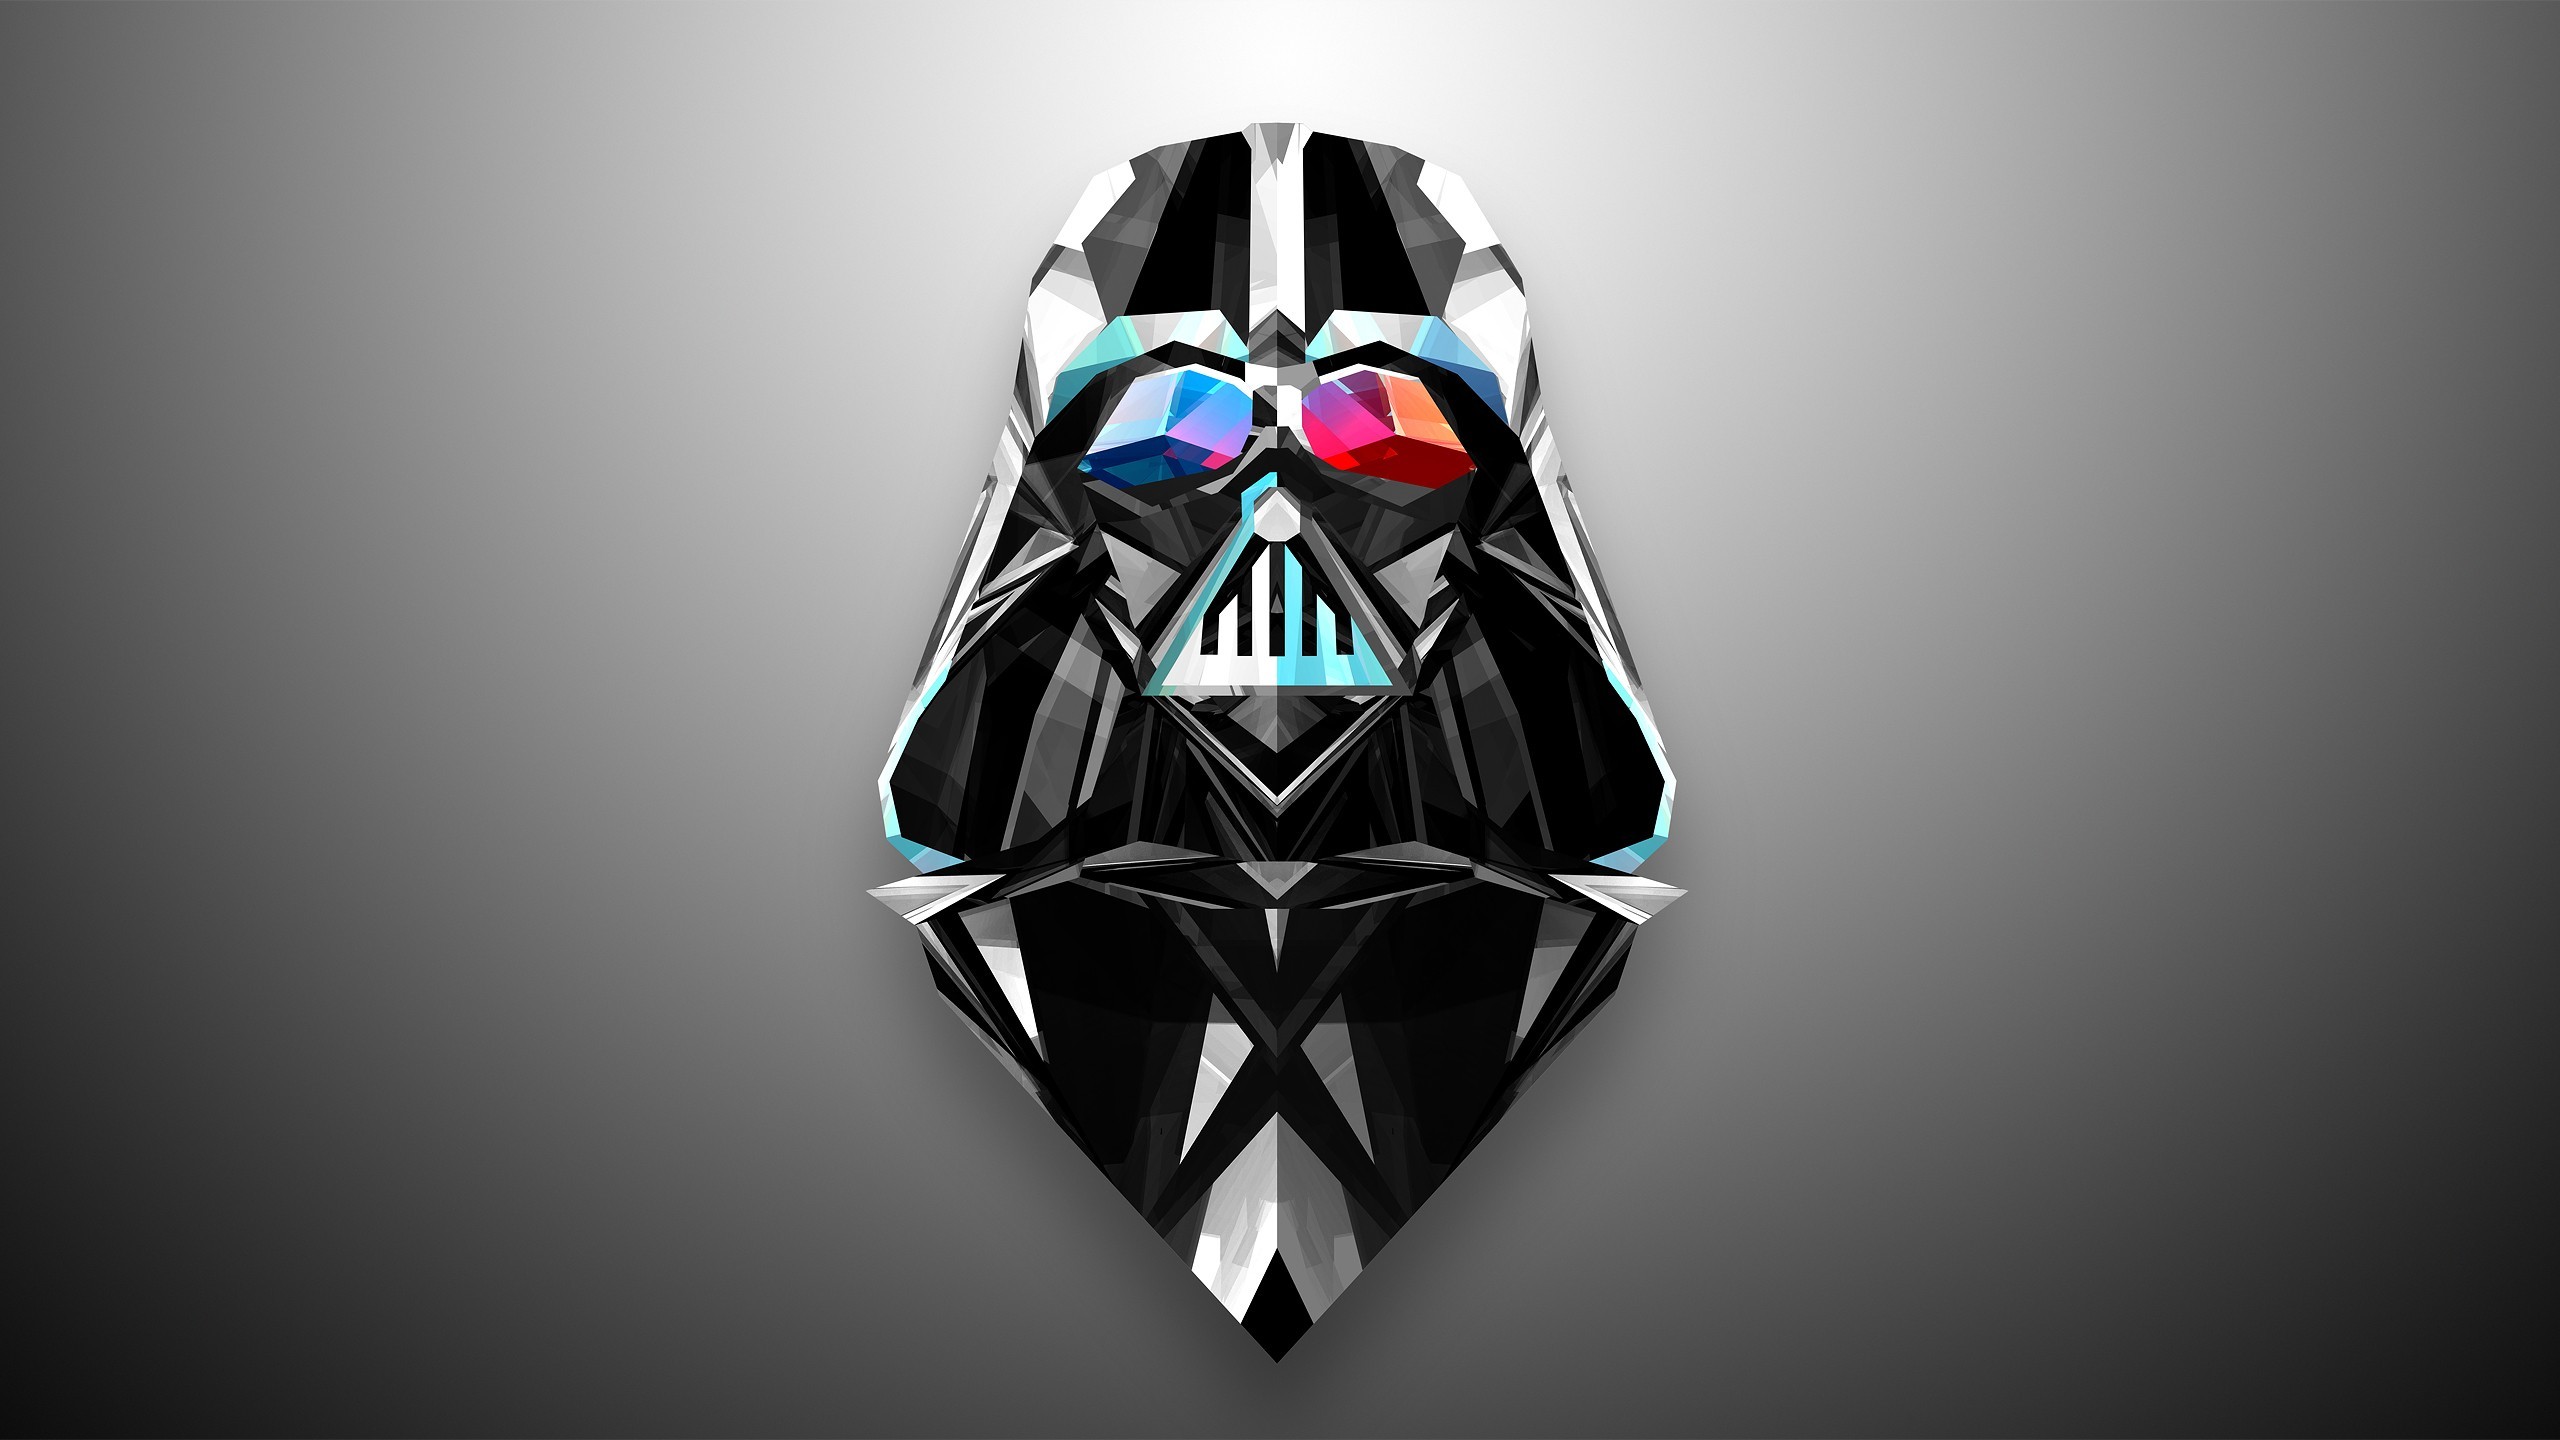 2560x1440 Darth Vader and Daft Punk get the Justin Maller treatment in Helmetica, a  vivid series of geometric wallpapers.